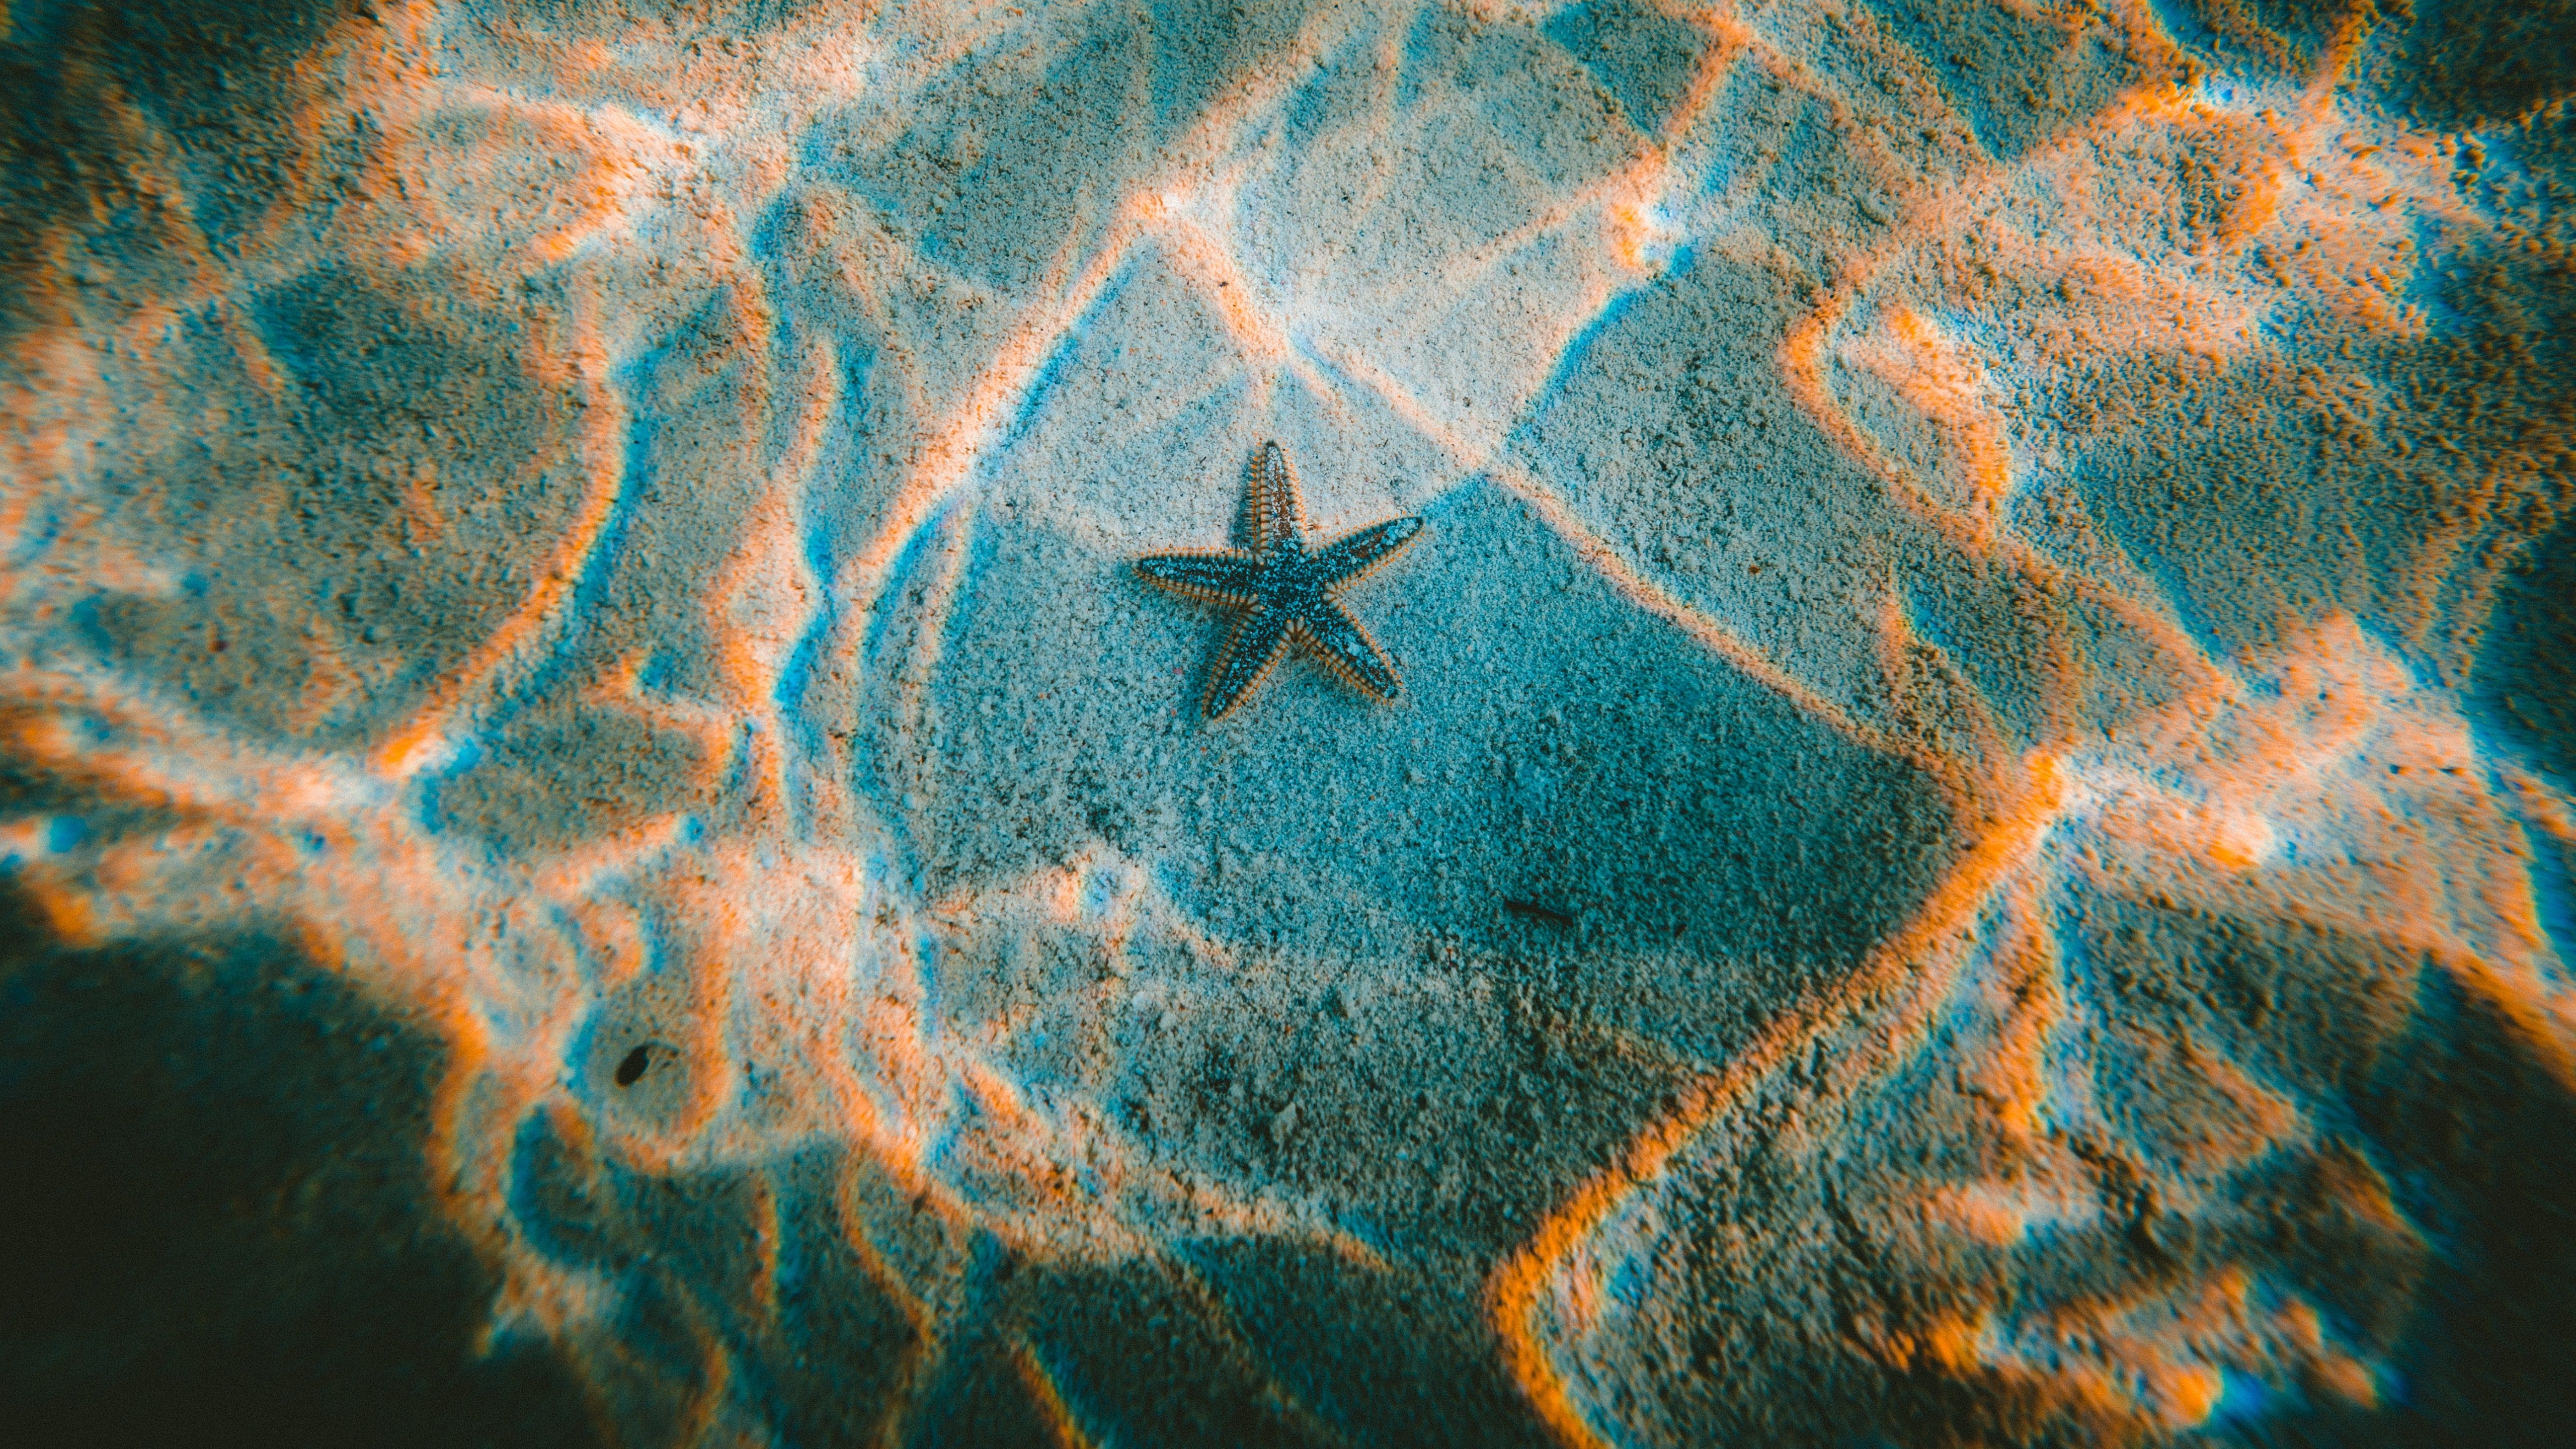 A starfish is seen in the sand at the bottom of the ocean. - Starfish